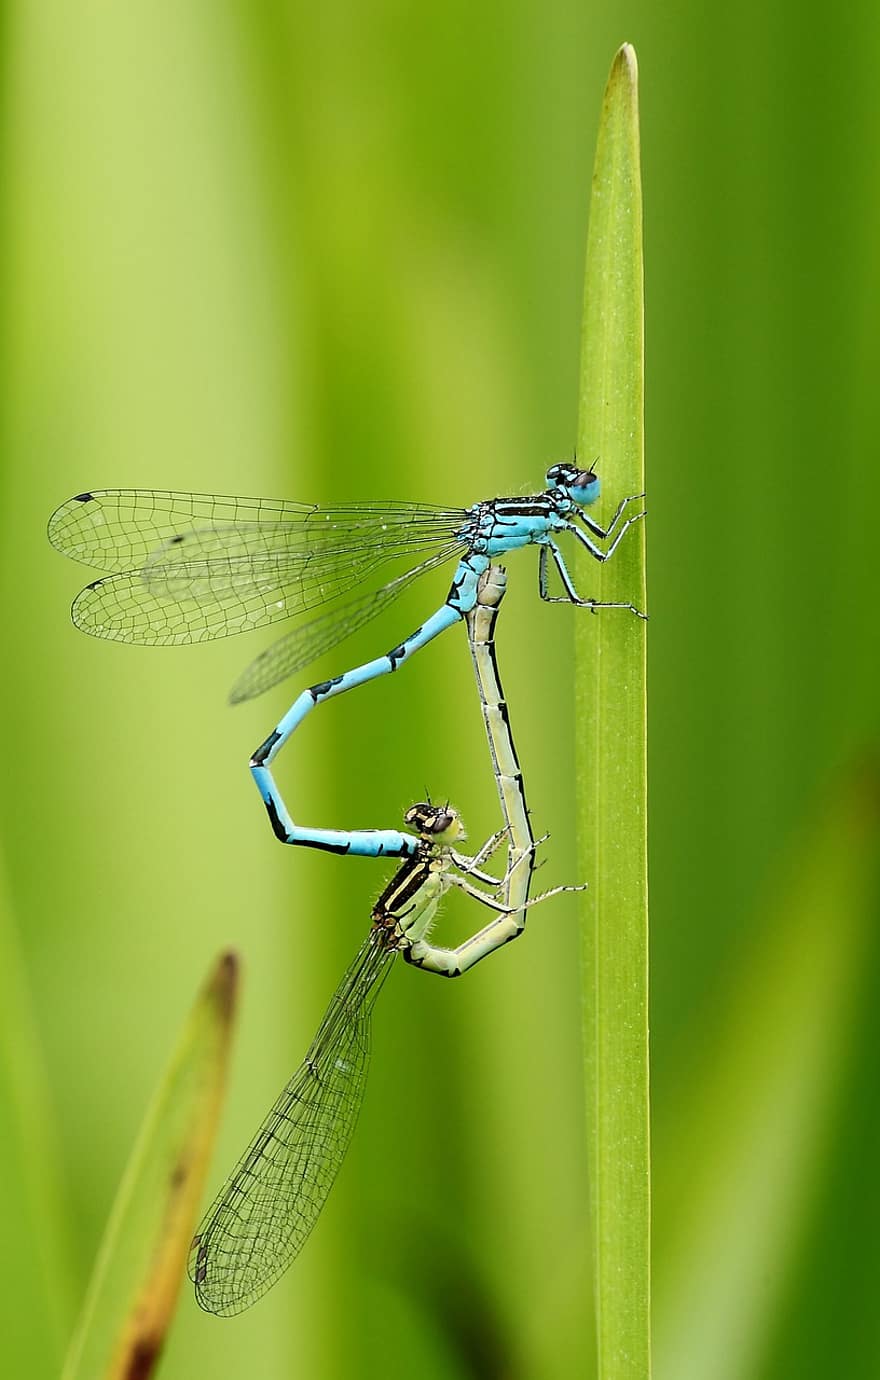 Insect, Dragonfly, Entomology, Species, Macro, Reproduction, Nature, close-up, green color, summer, animals in the wild